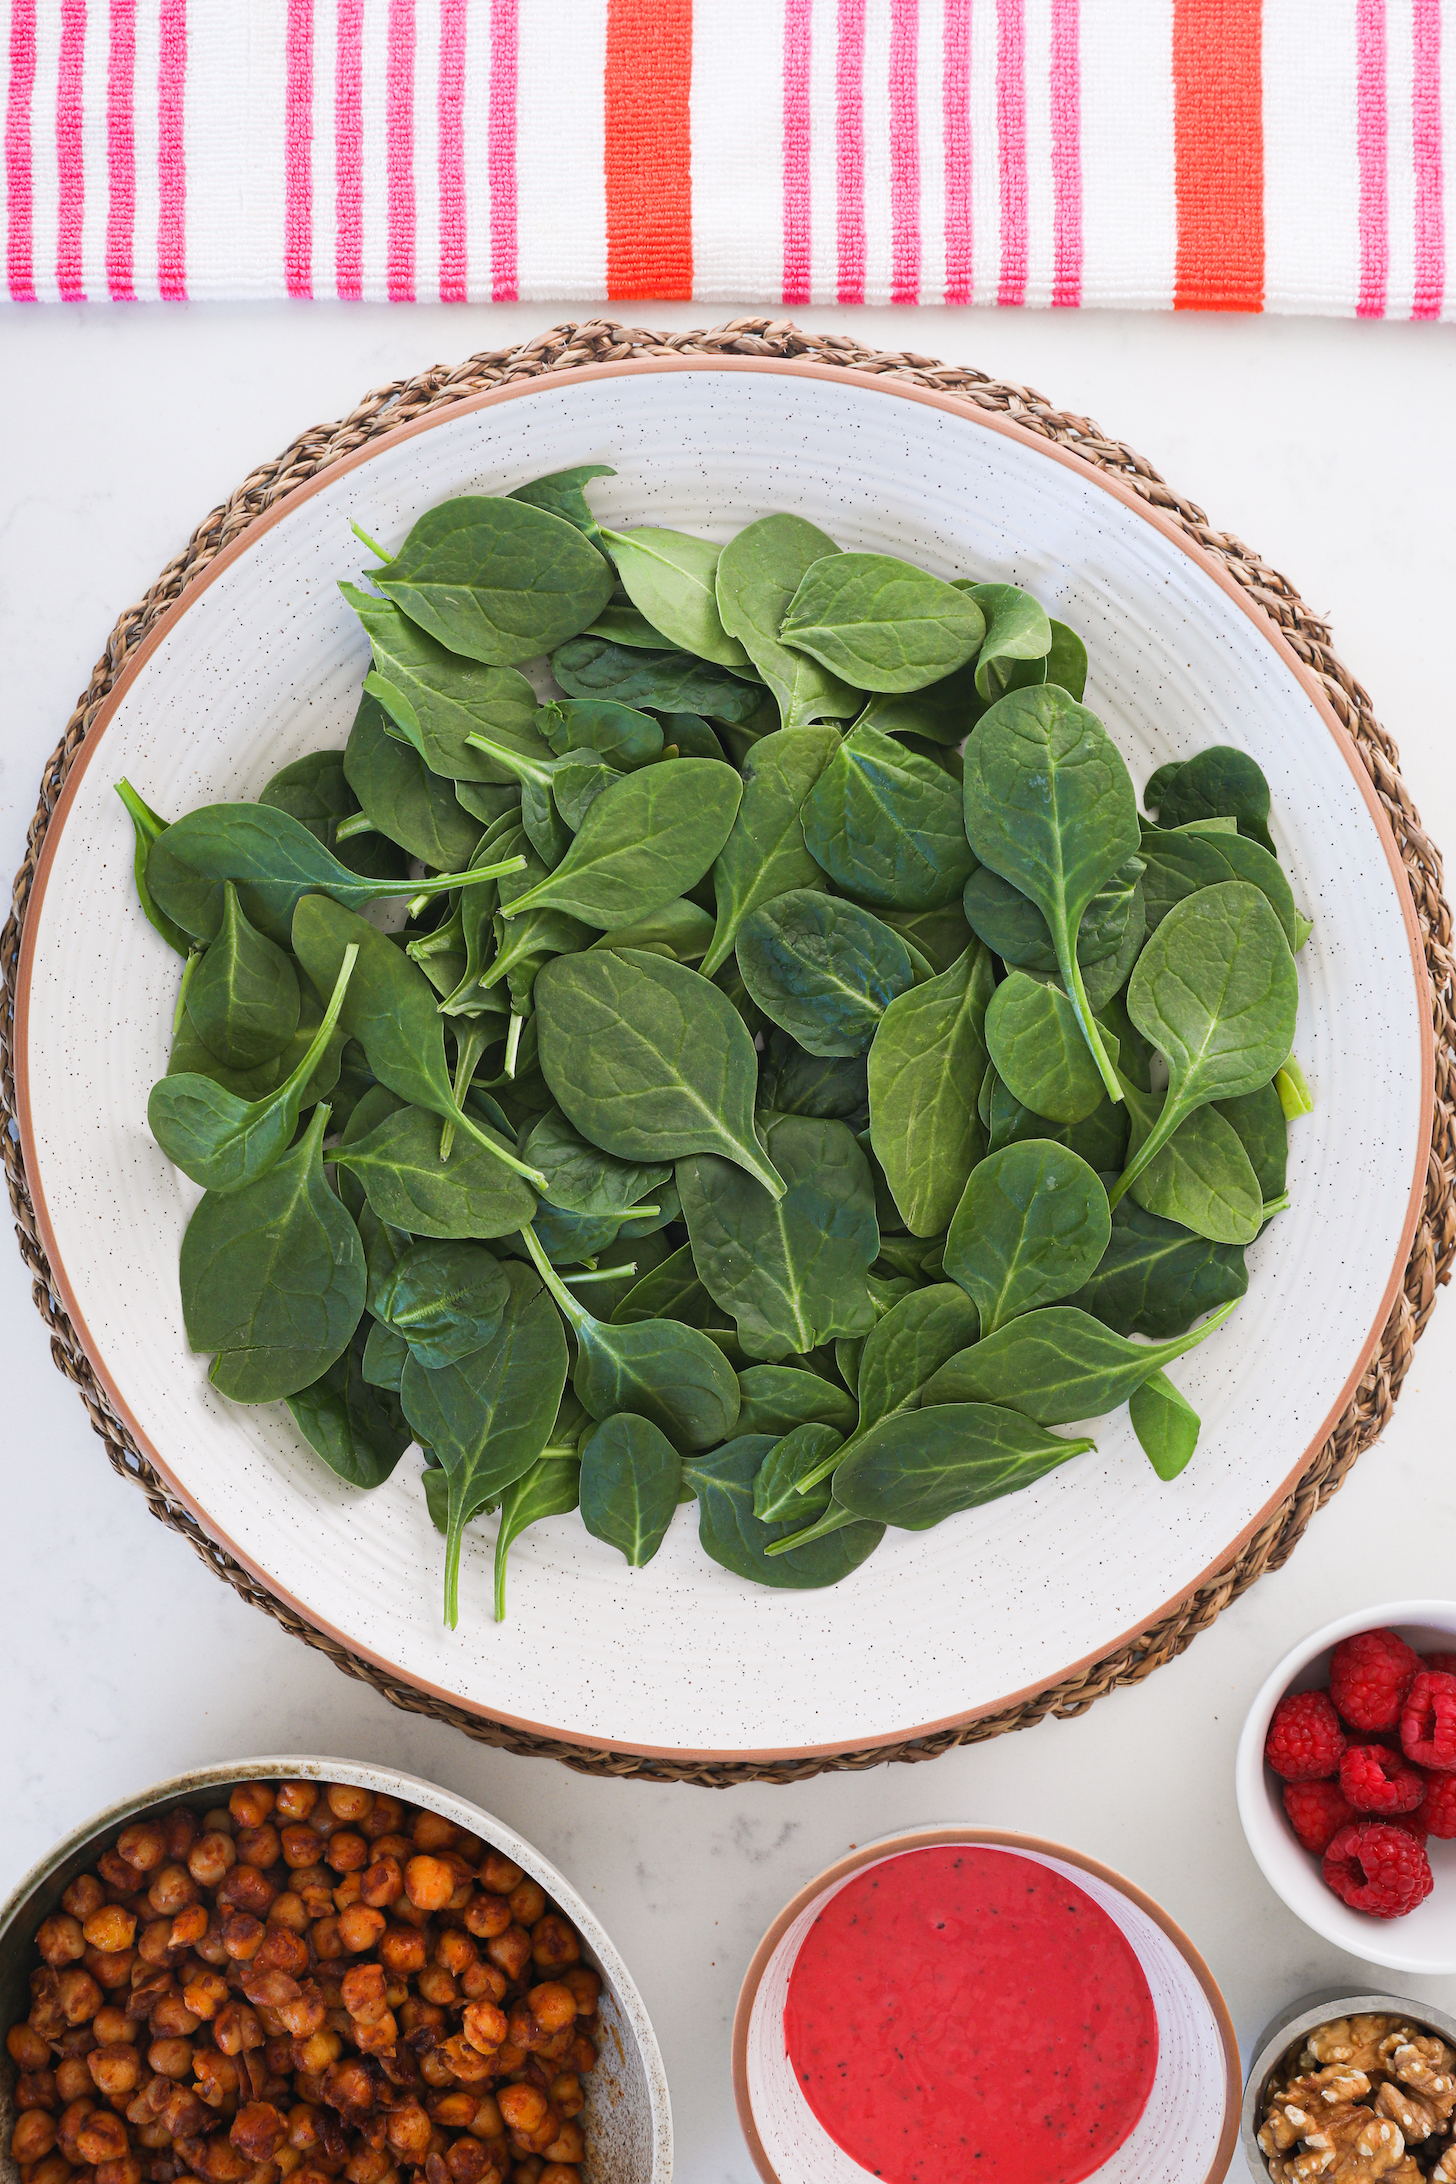 A plate of spinach leaves surrounded by bowls of food.